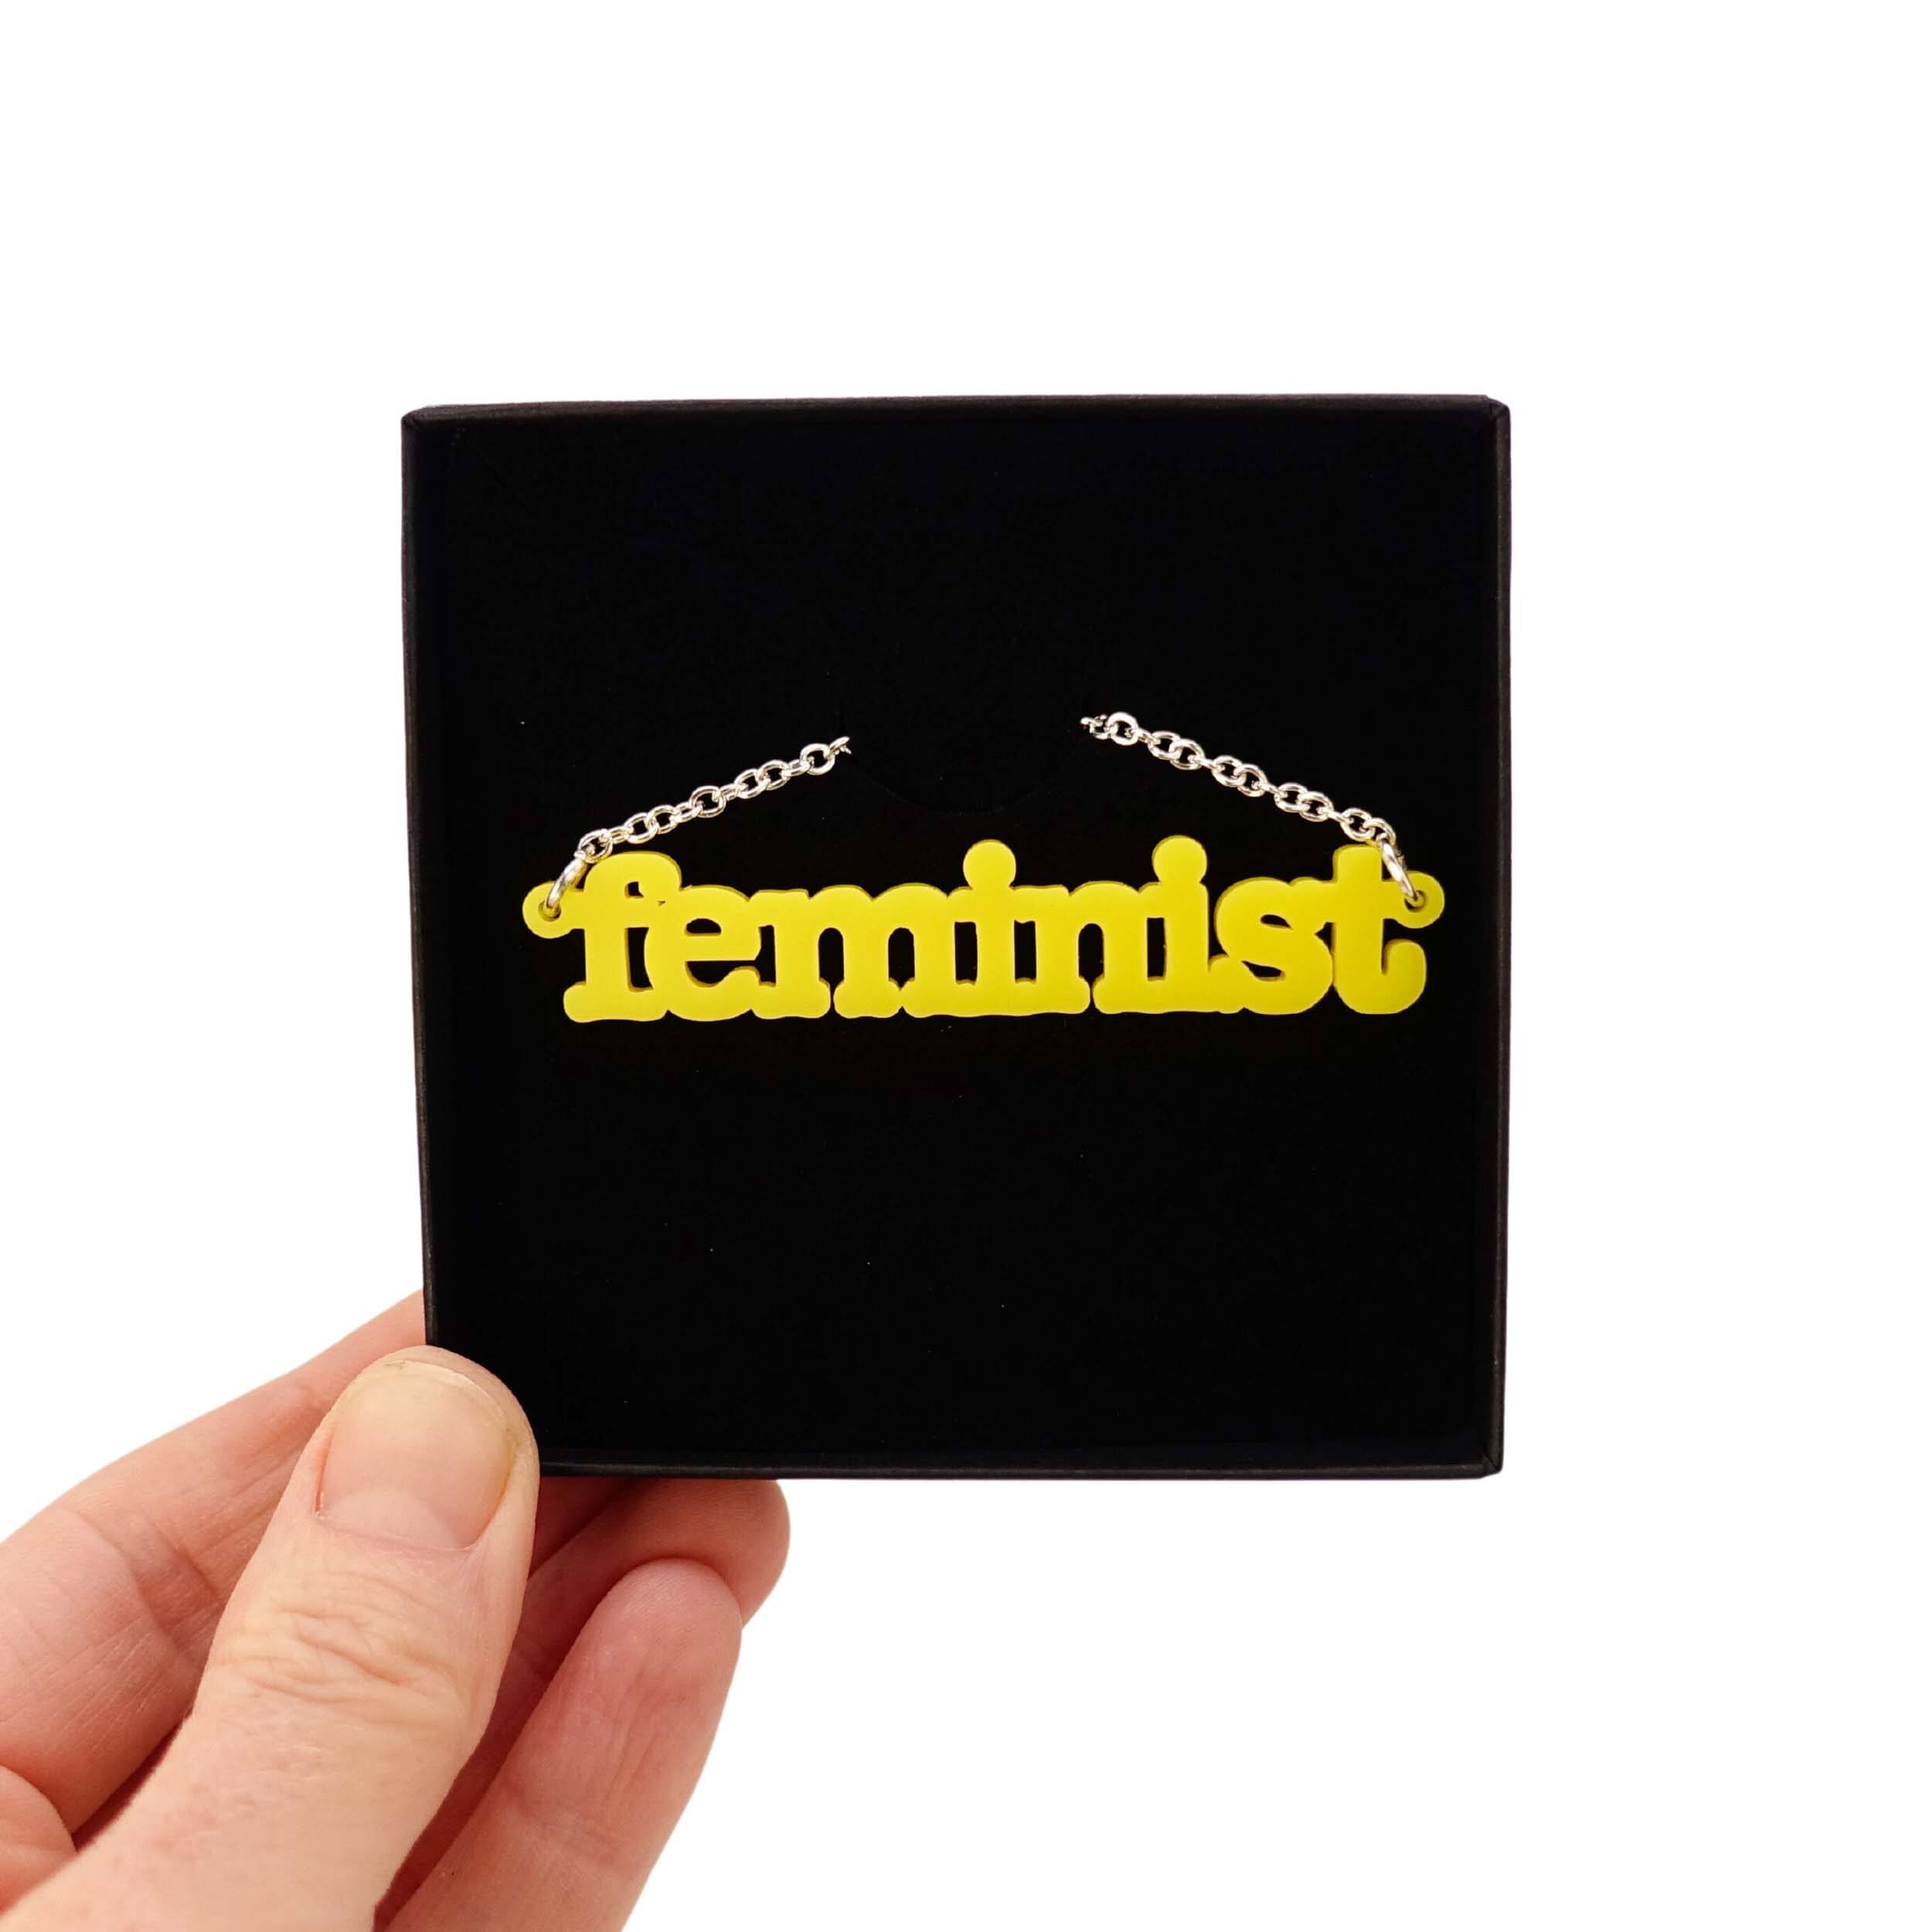 Lemon Feminist necklace shown in a Wear and Resist gift box. 